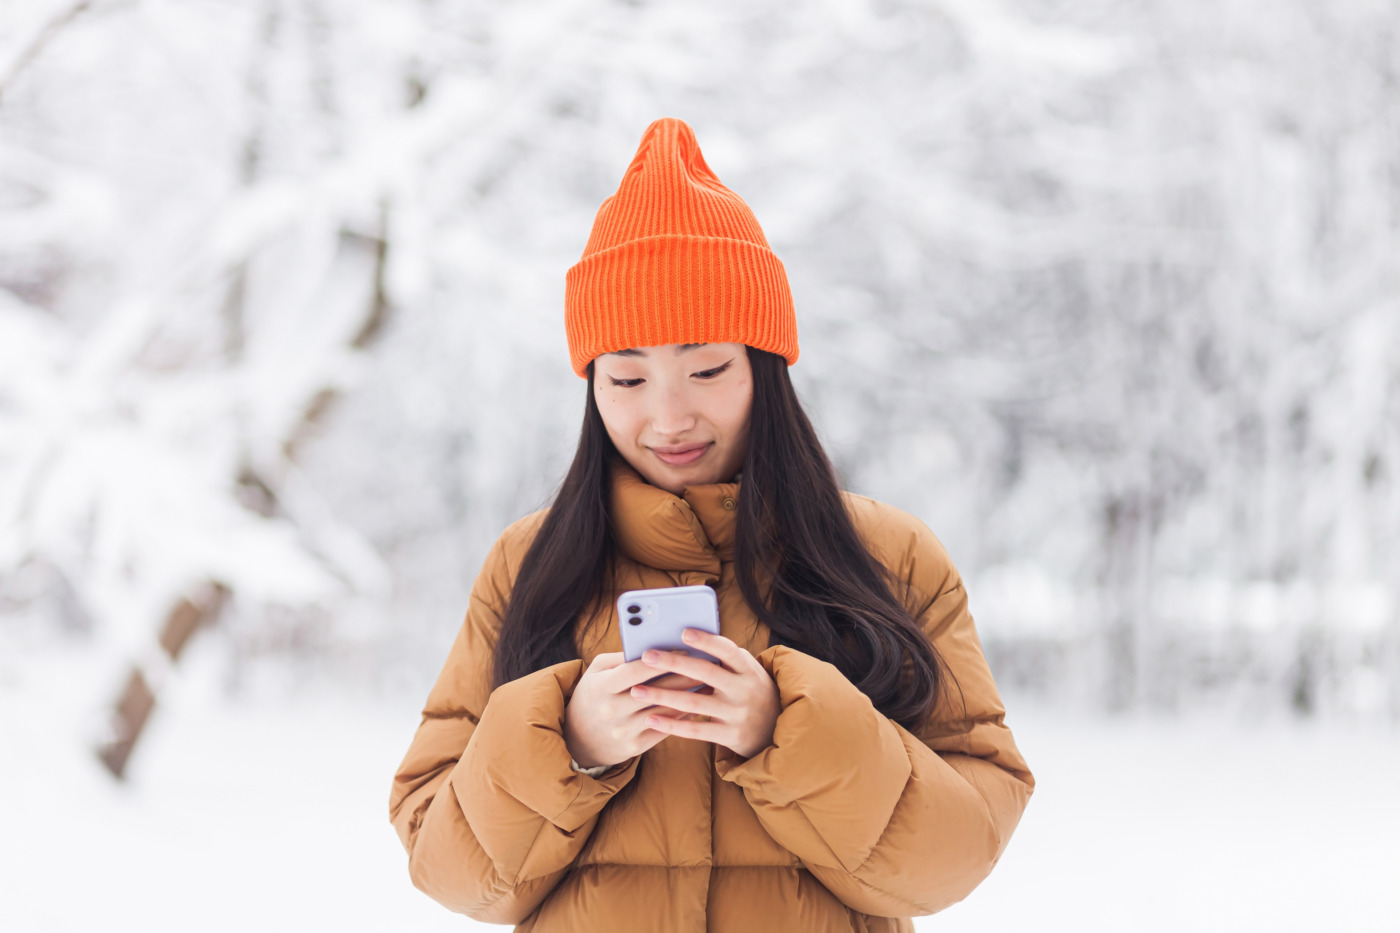 Gen Z woman walking in the park, uses the phone for online shopping, on a winter snowy day